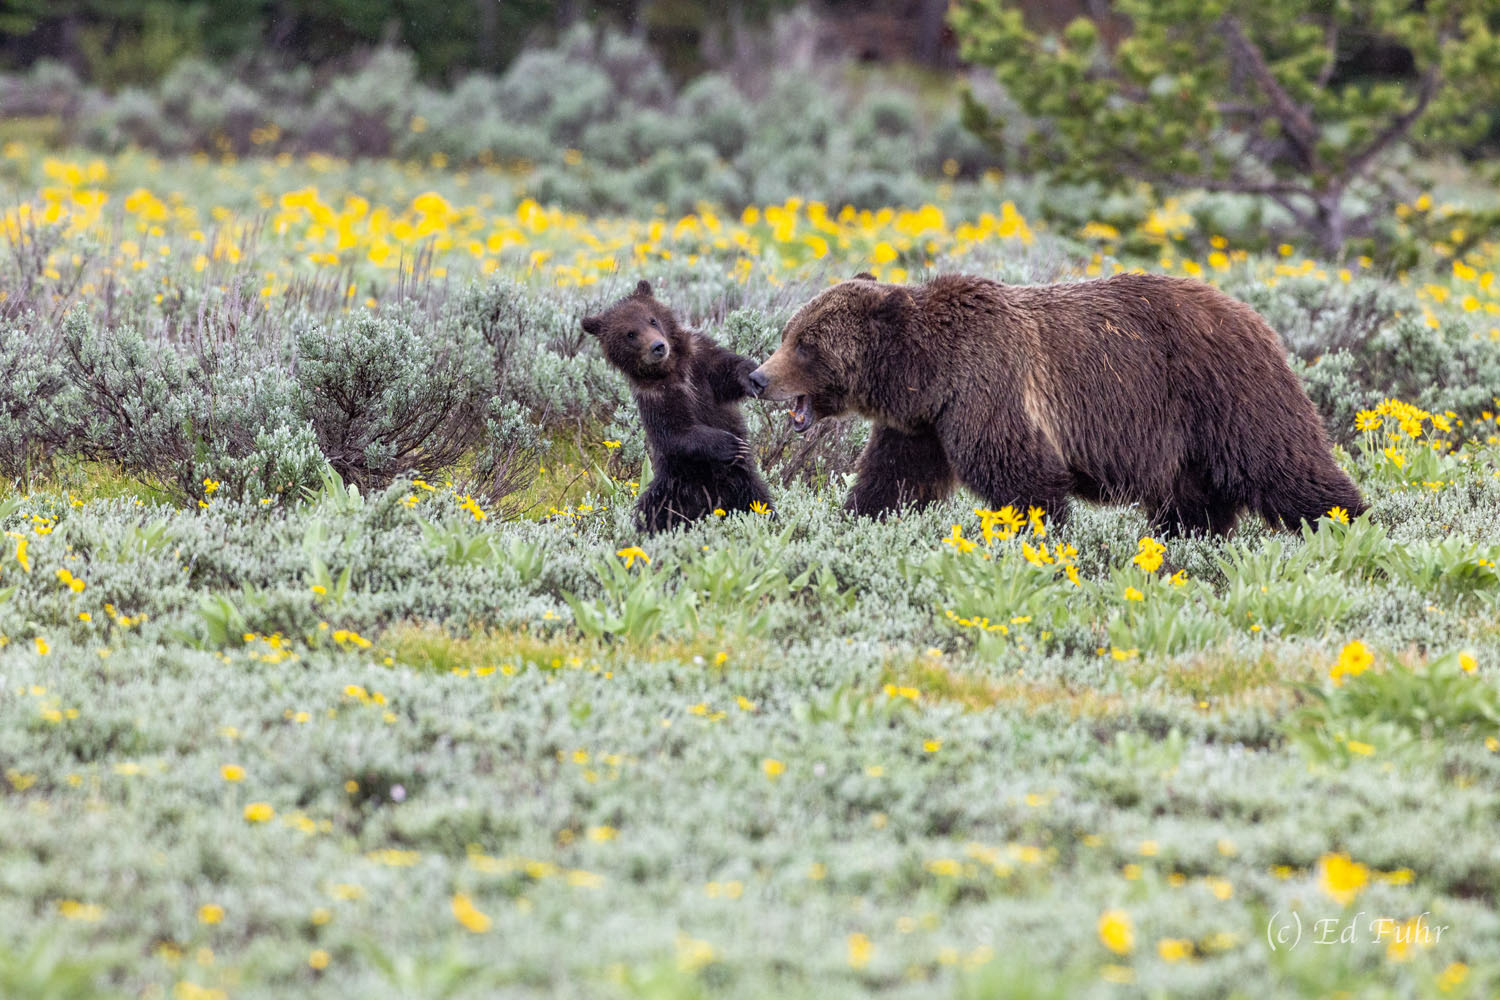 With a single cub, grizzly 399 seems to spend more time socializing and playing with her cub than in prior years when she has...